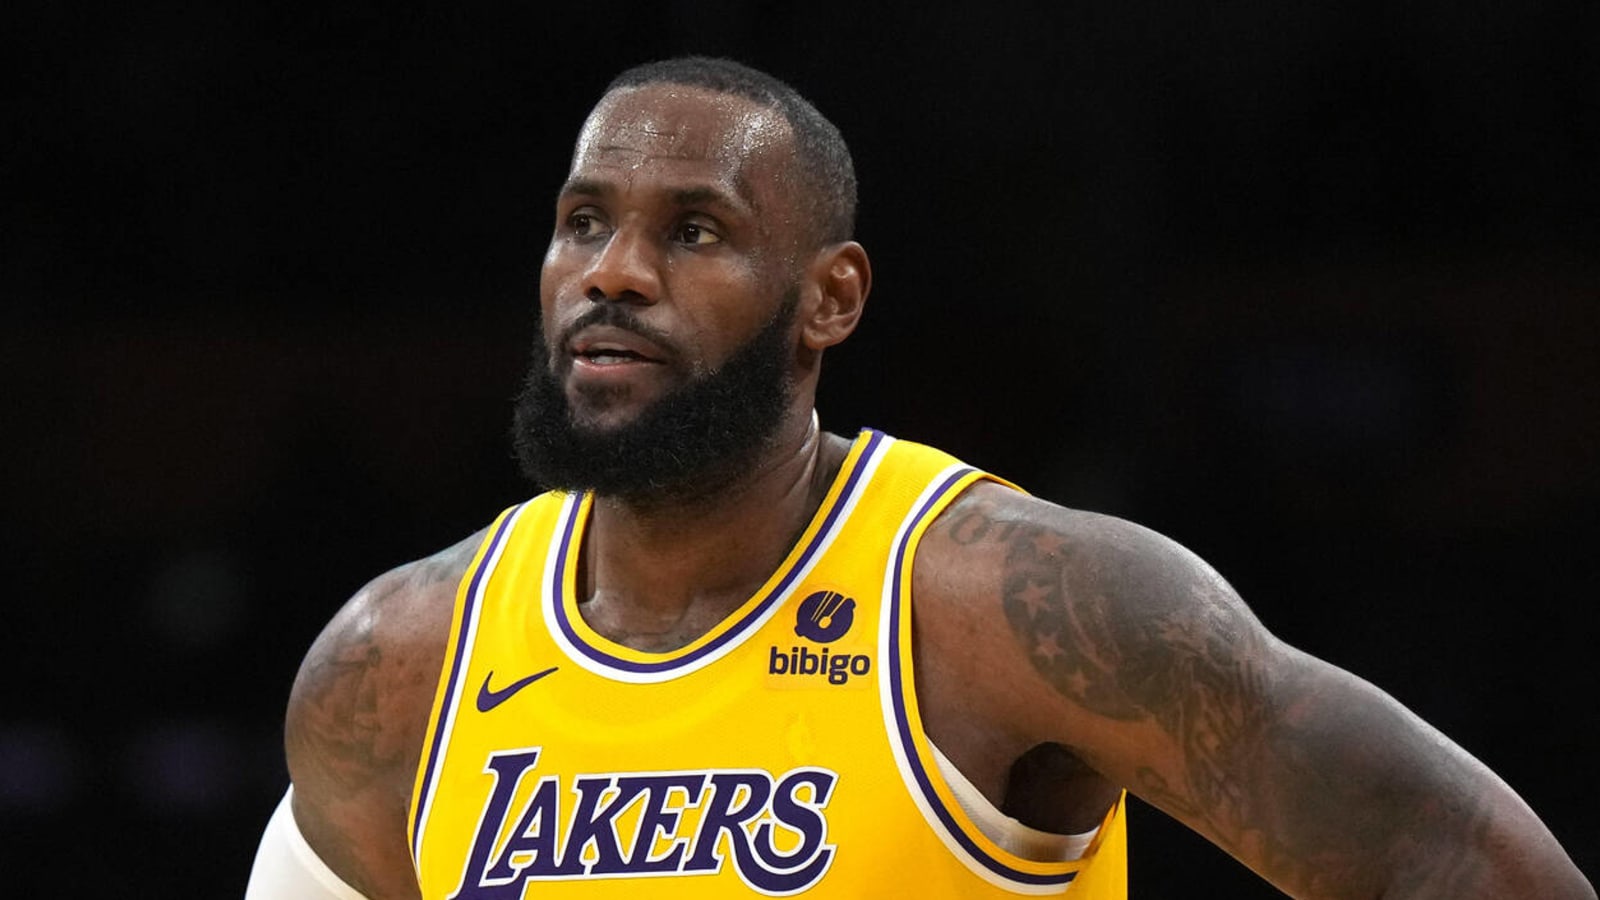 LeBron calls for NBA to address safety concerns with Cavs’ court